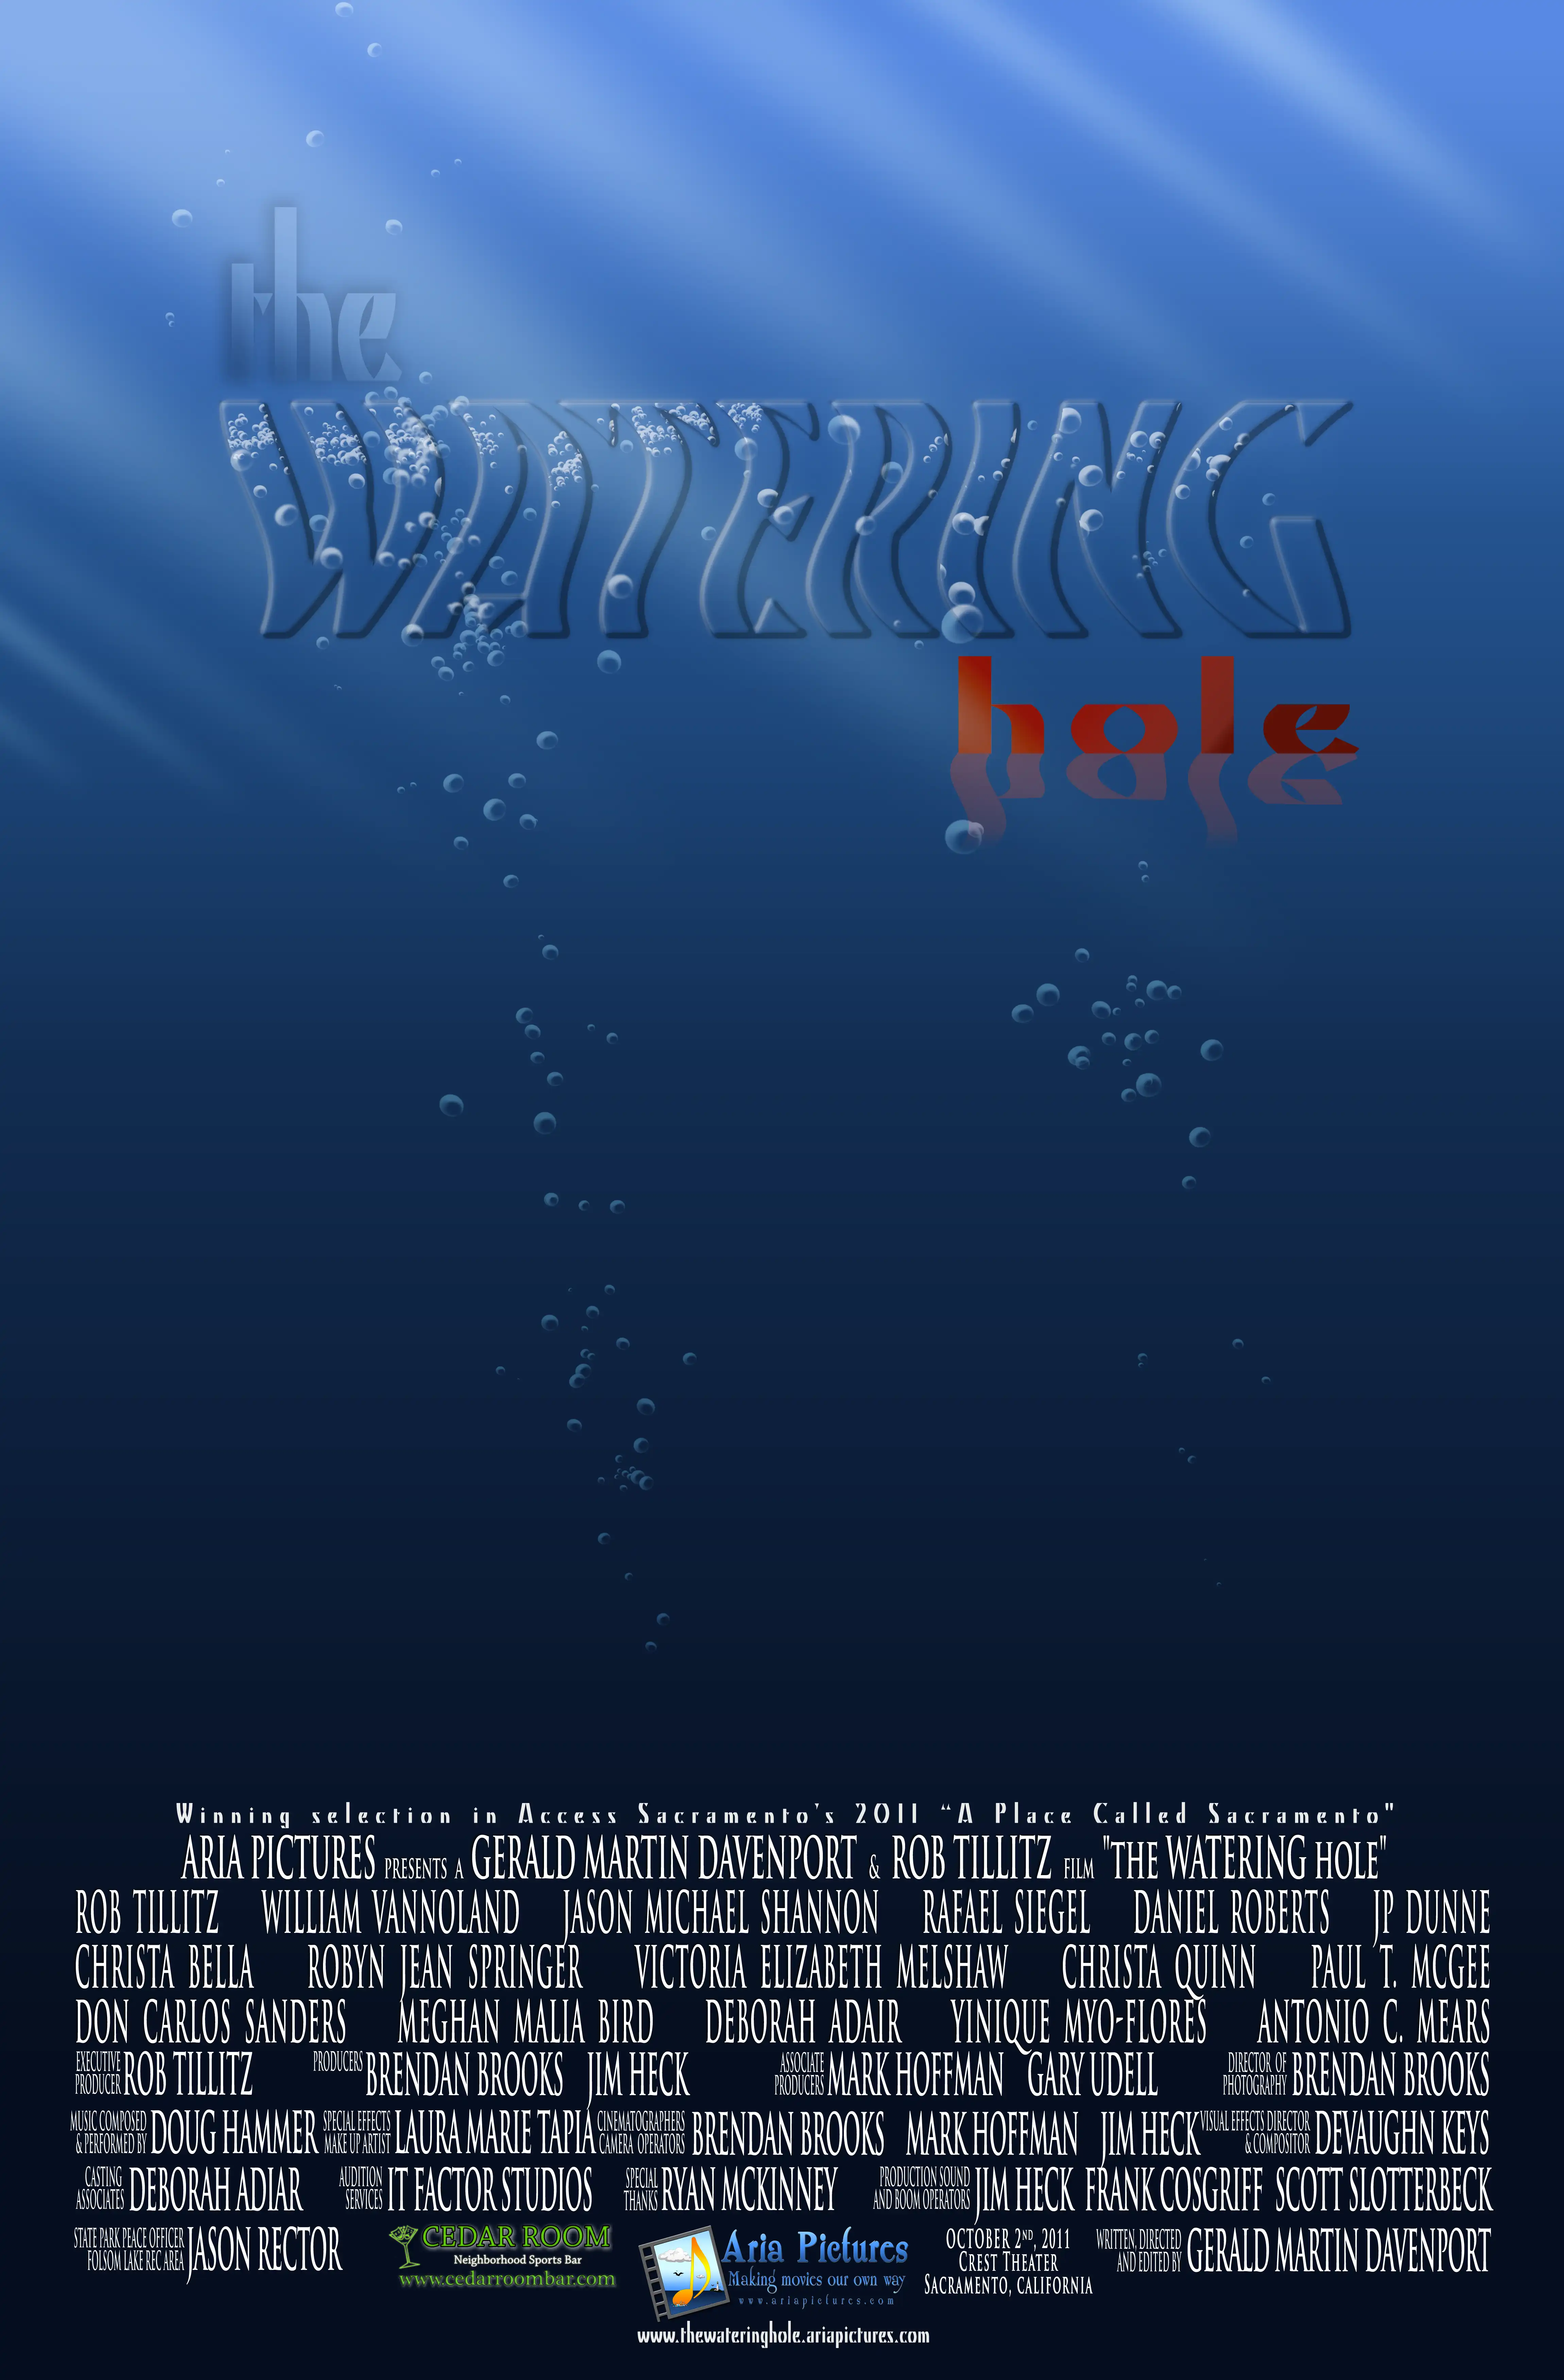 The WATERING hole movie poster by Aria Pictures.